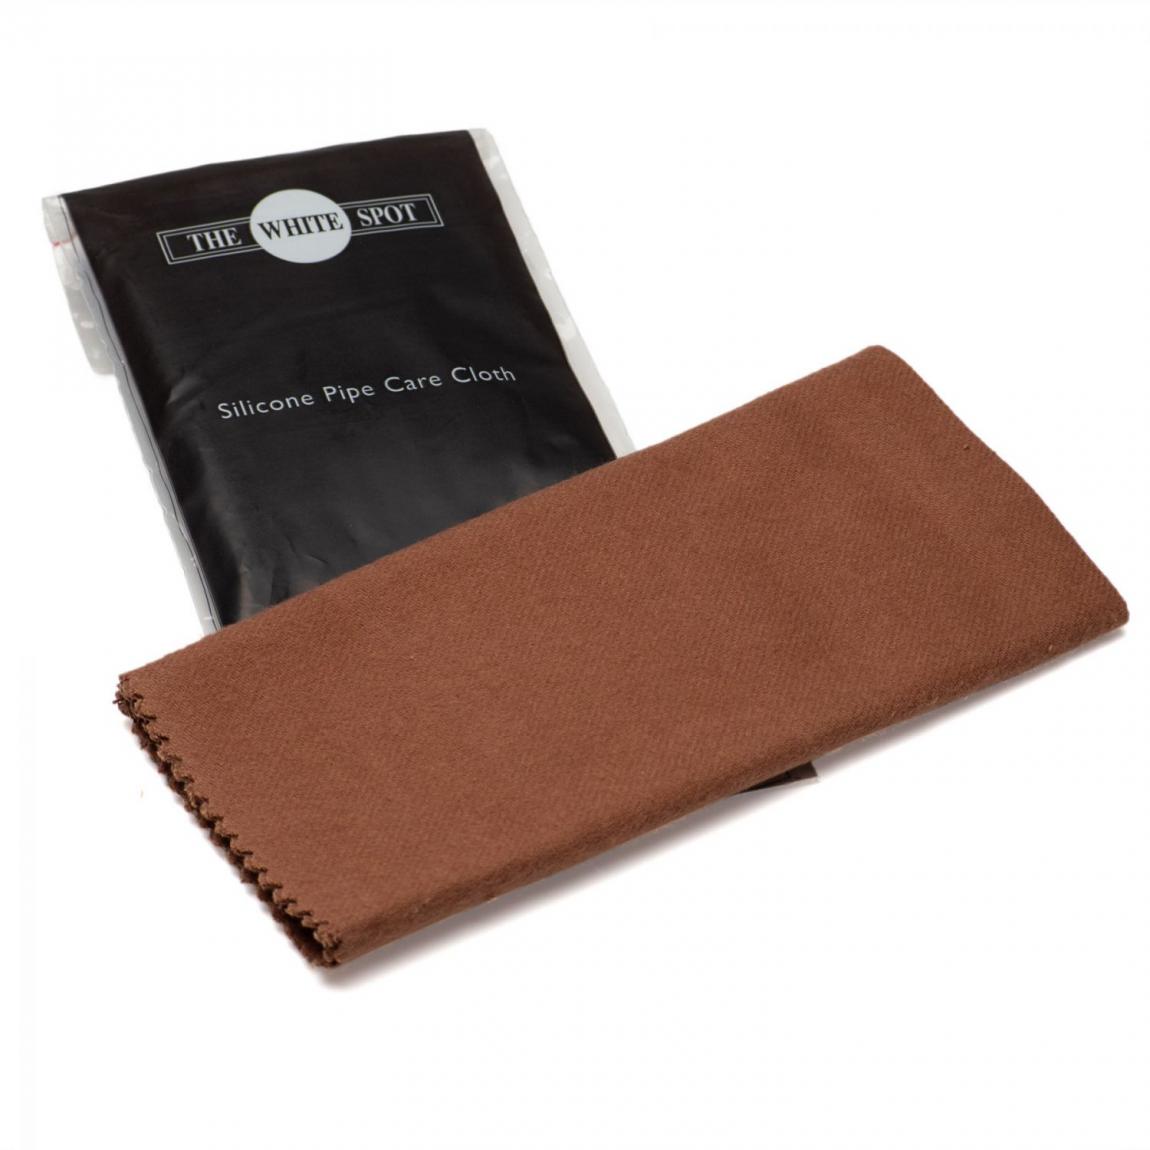 Dunhill's pipe care cloth